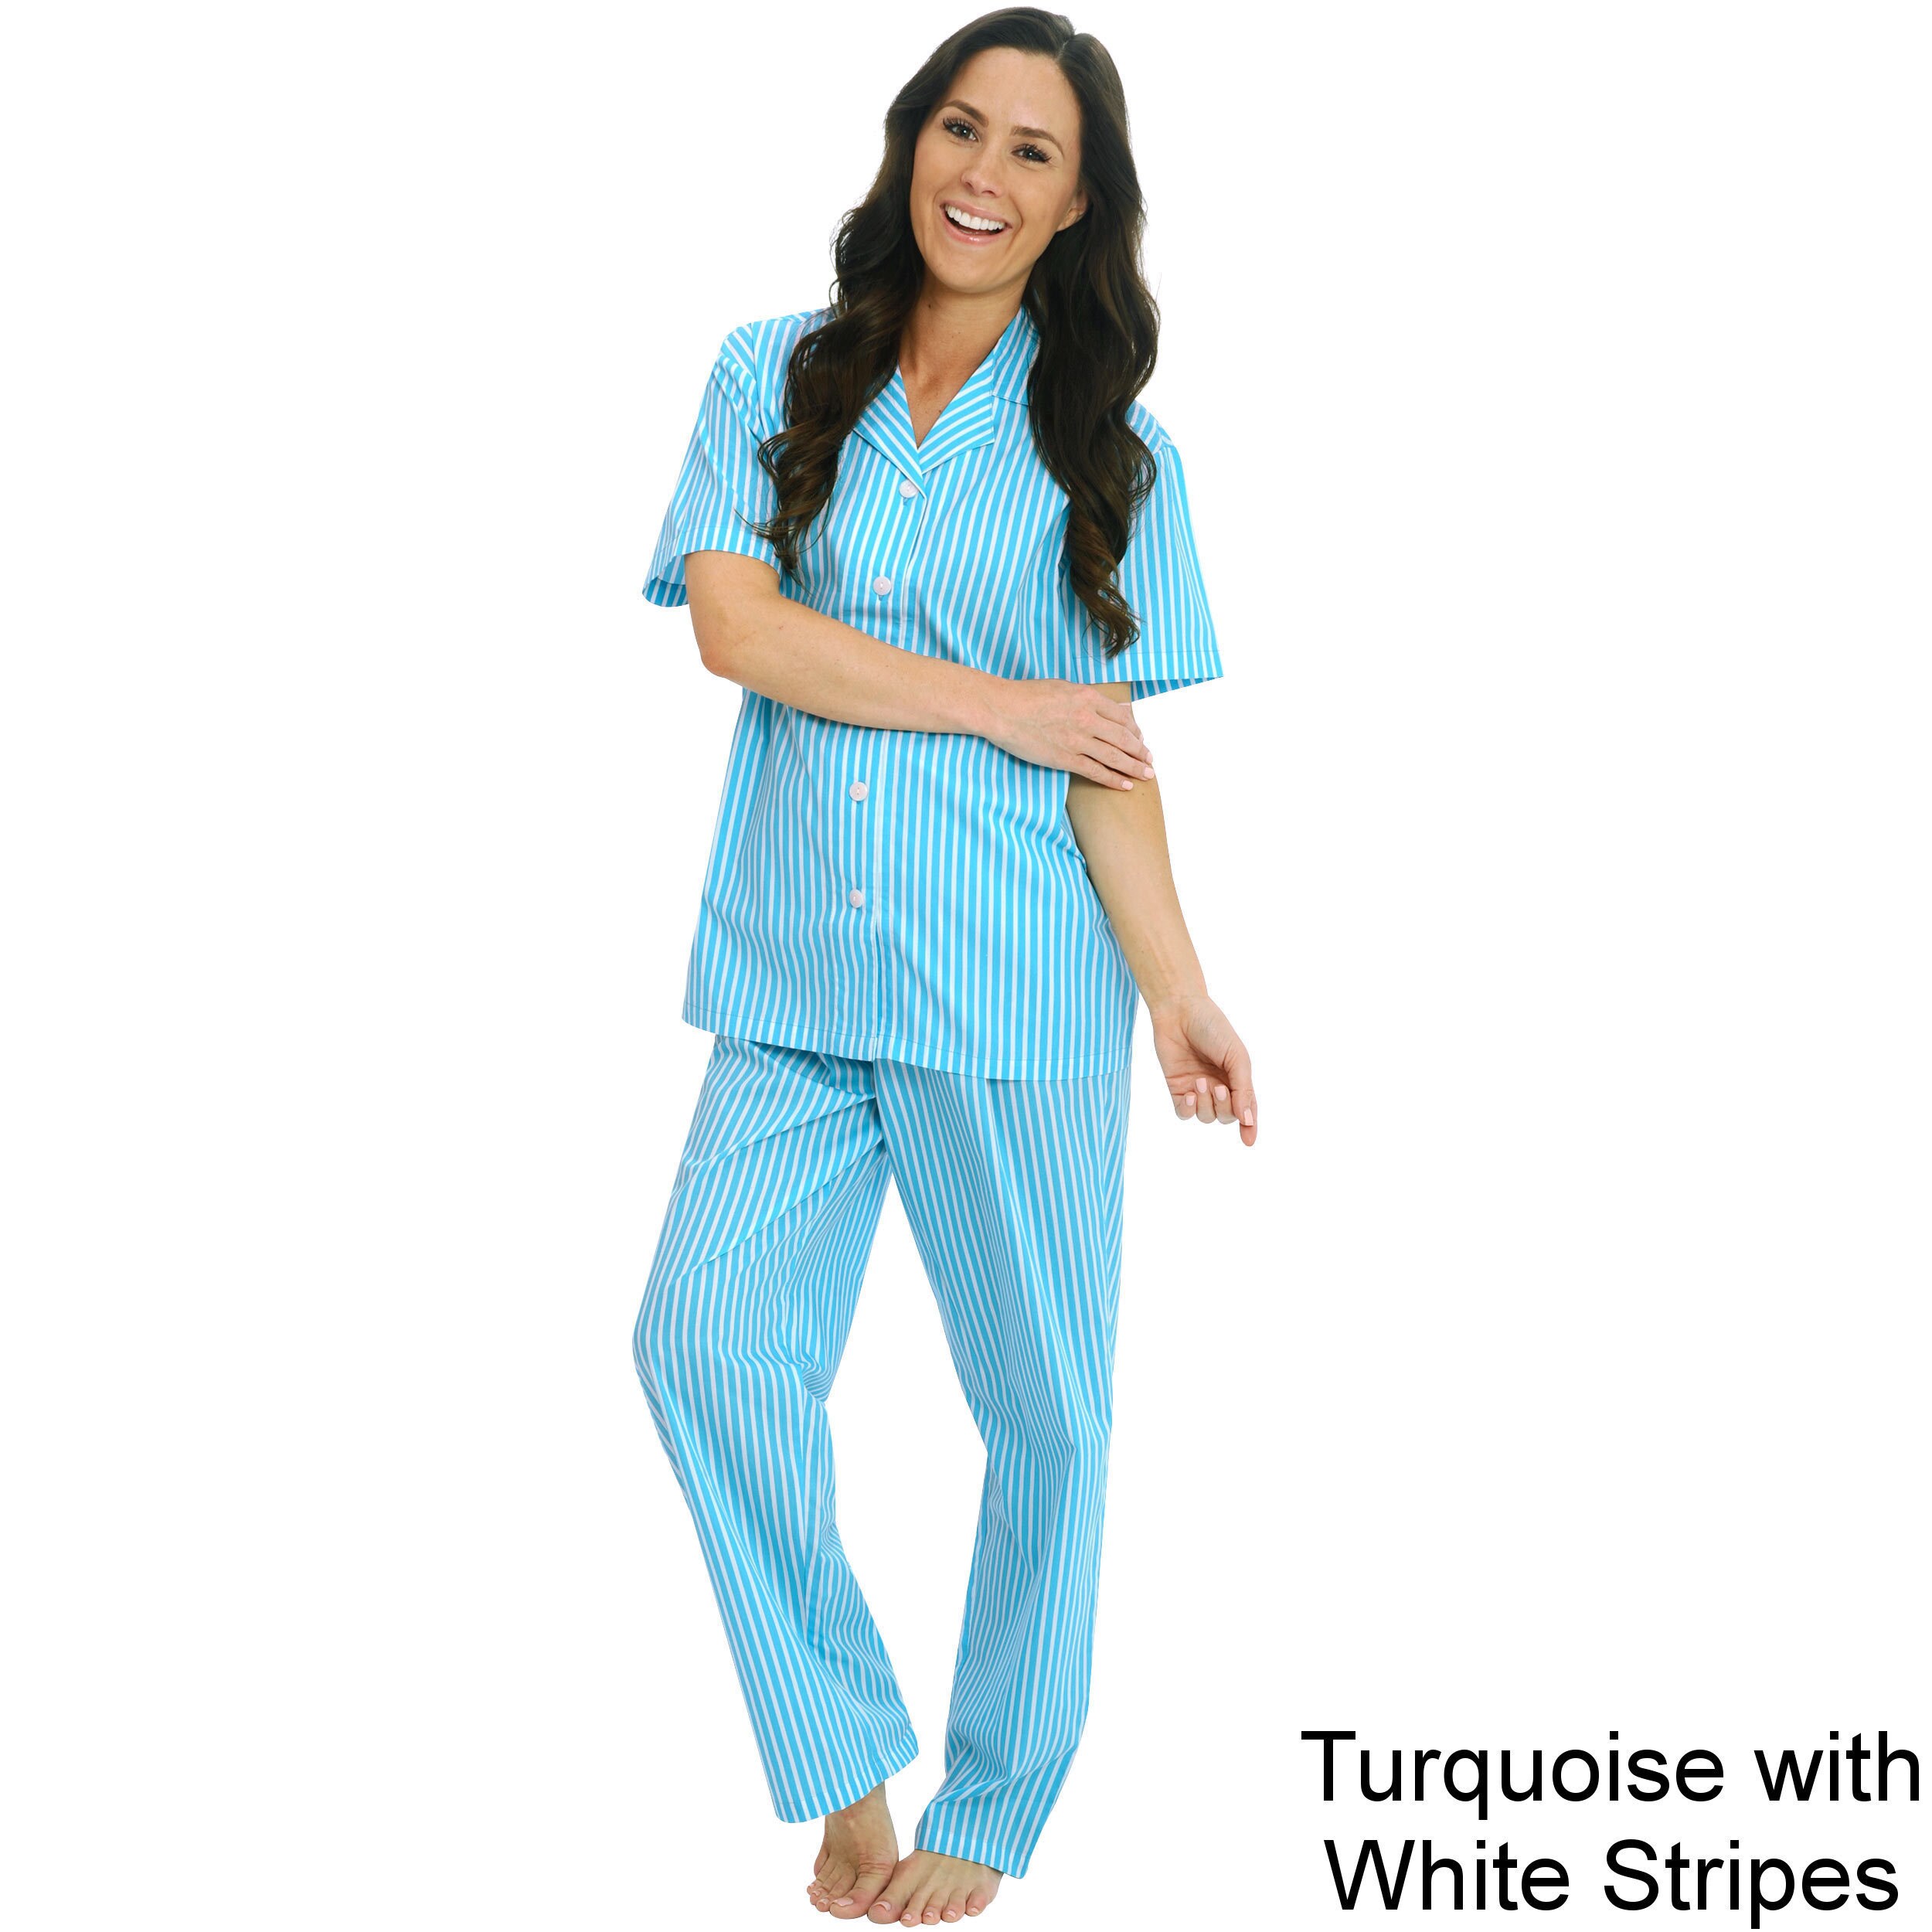 Del Rossa Womens Woven Cotton Top And Pants Pajama Set